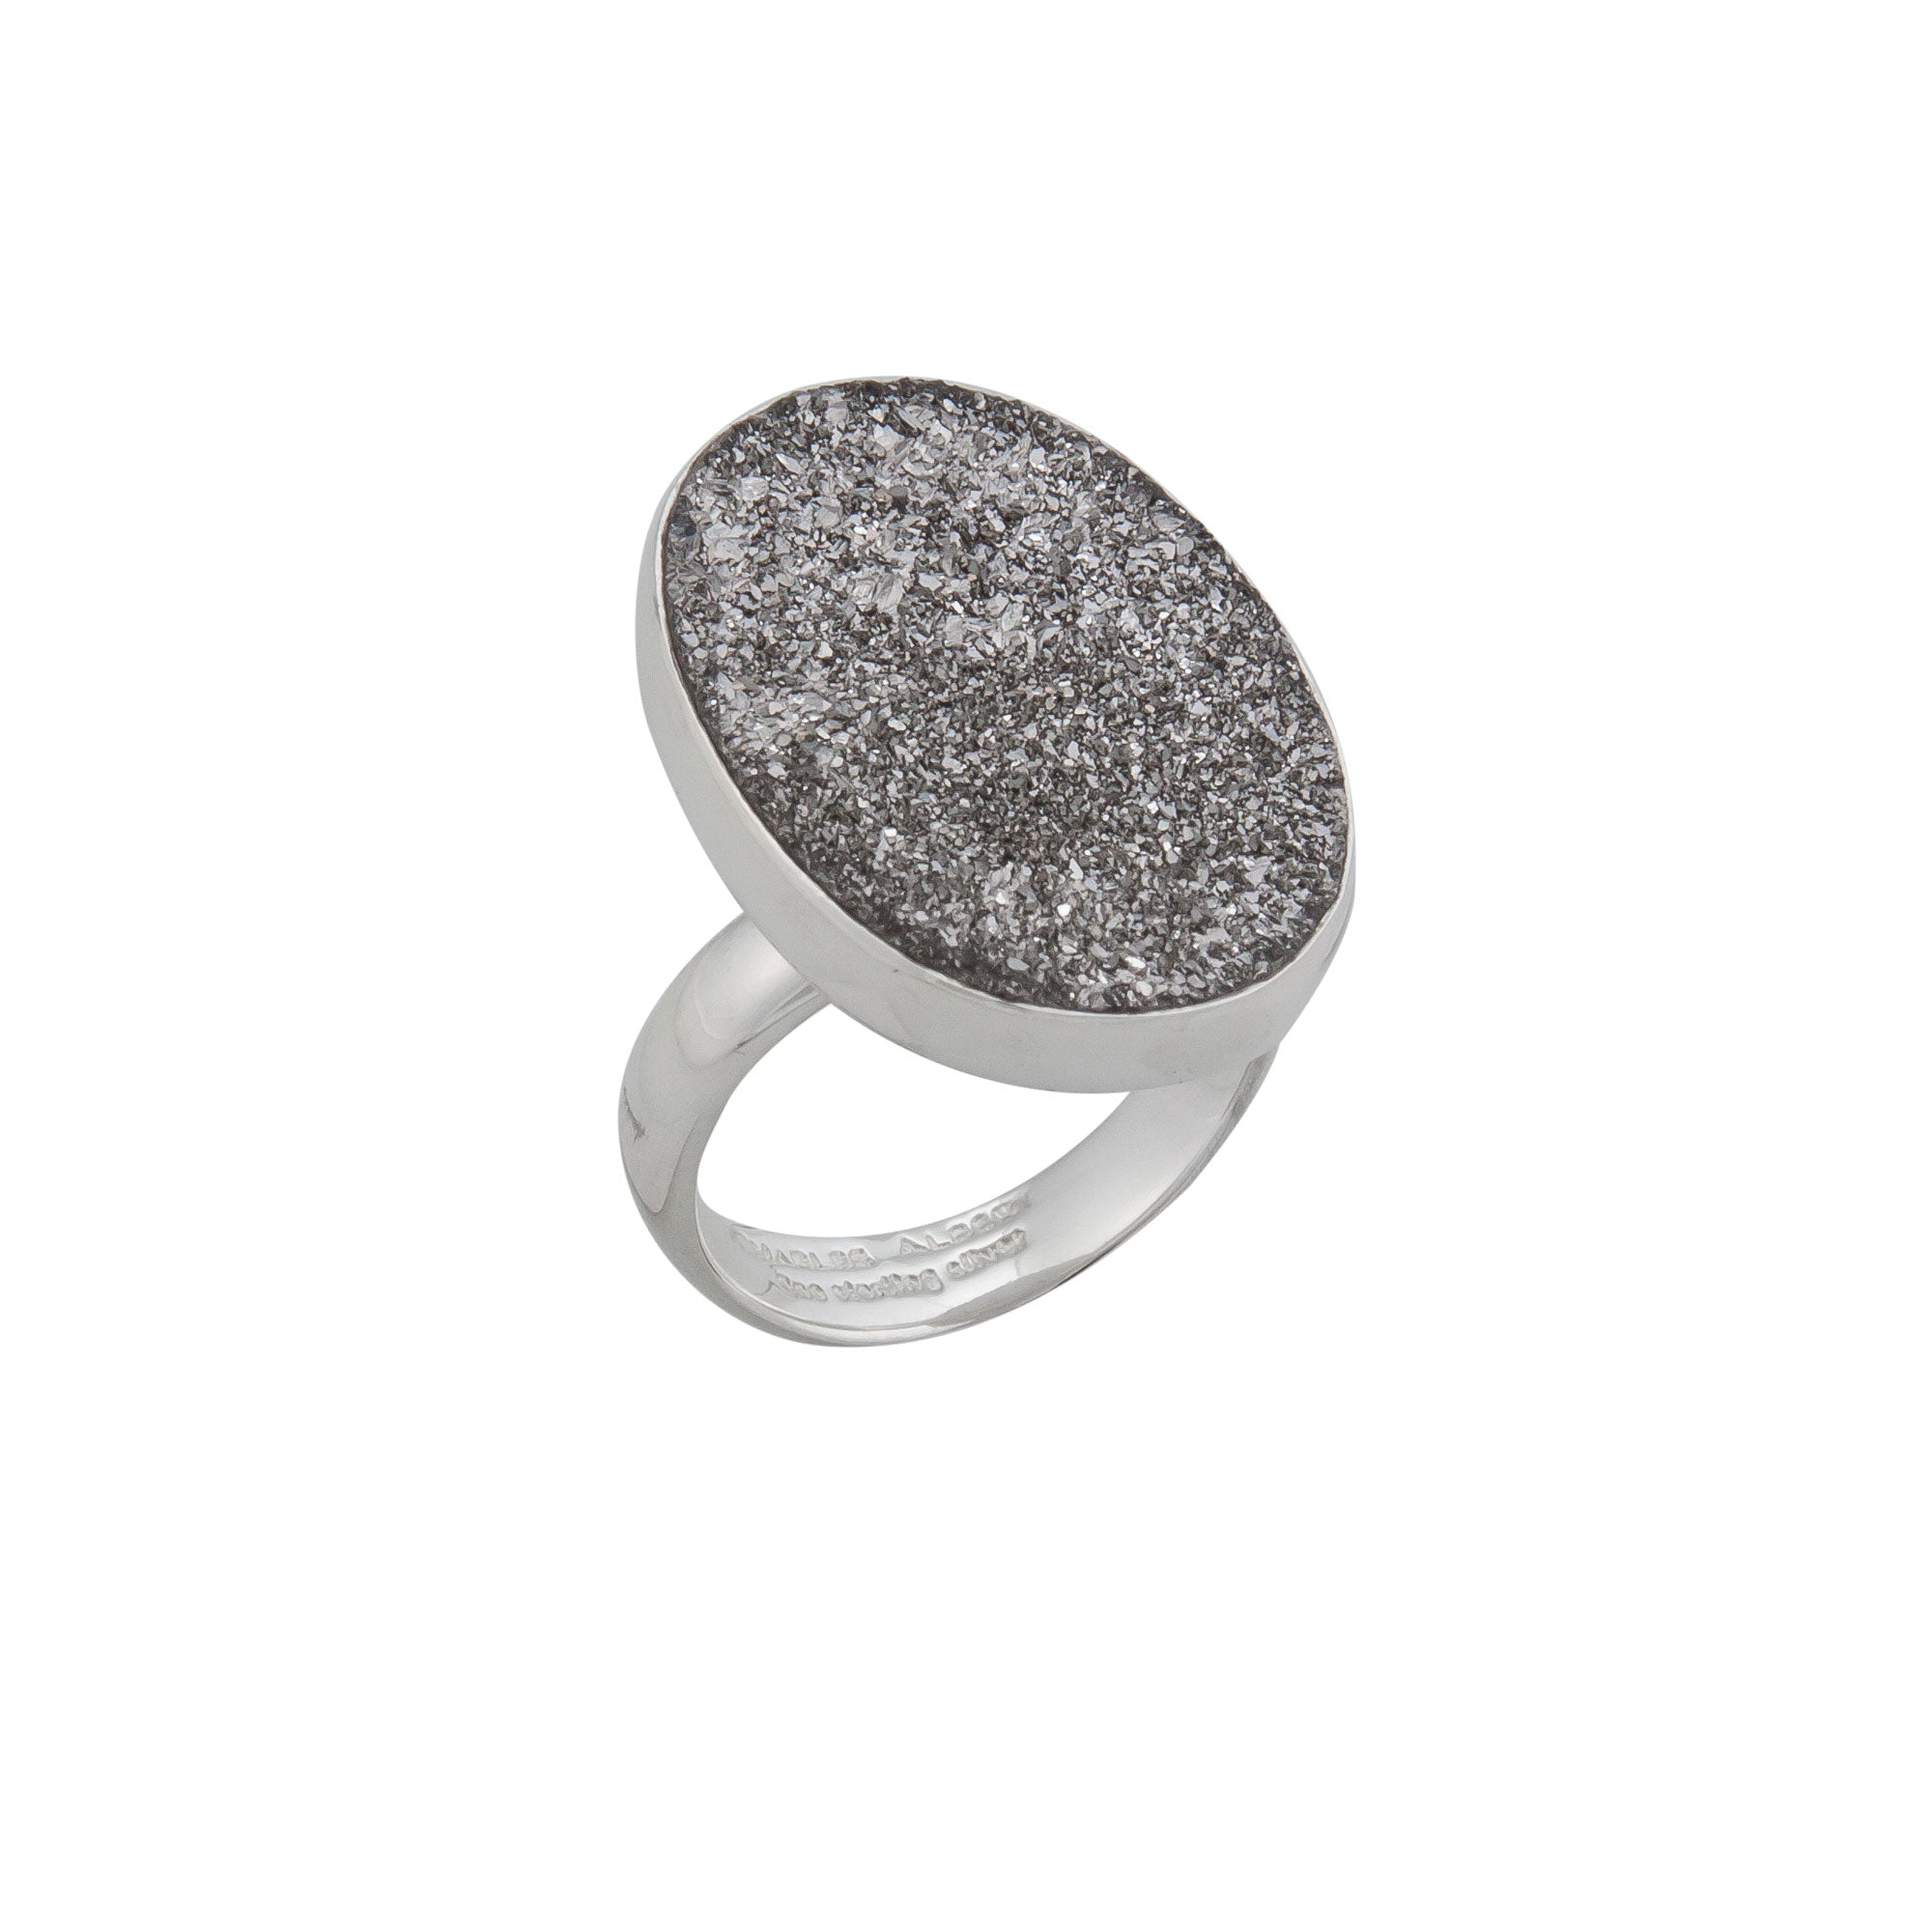 Sterling Silver Oval Platinum Druse Adjustable Ring | Charles Albert Jewelry